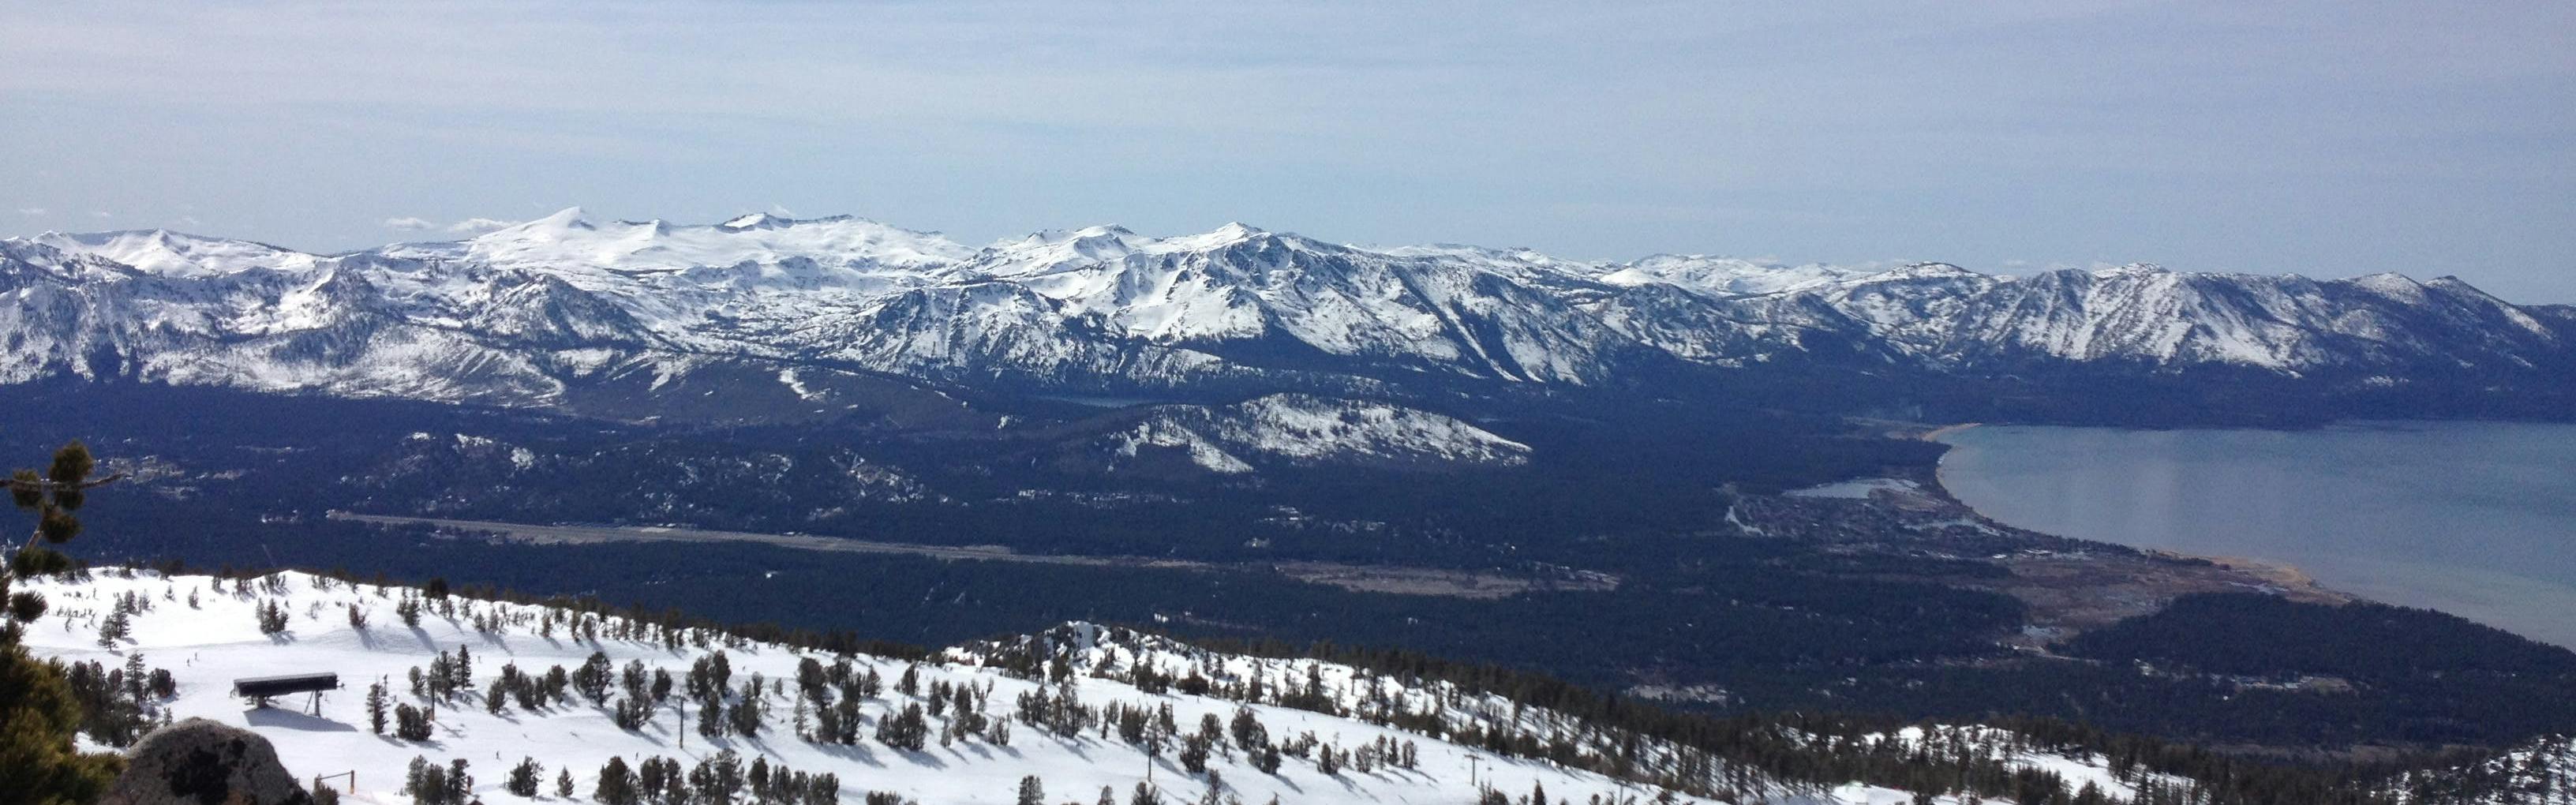 View of Lake Tahoe with snowy ski areas and mountain peaks surrounding it. 